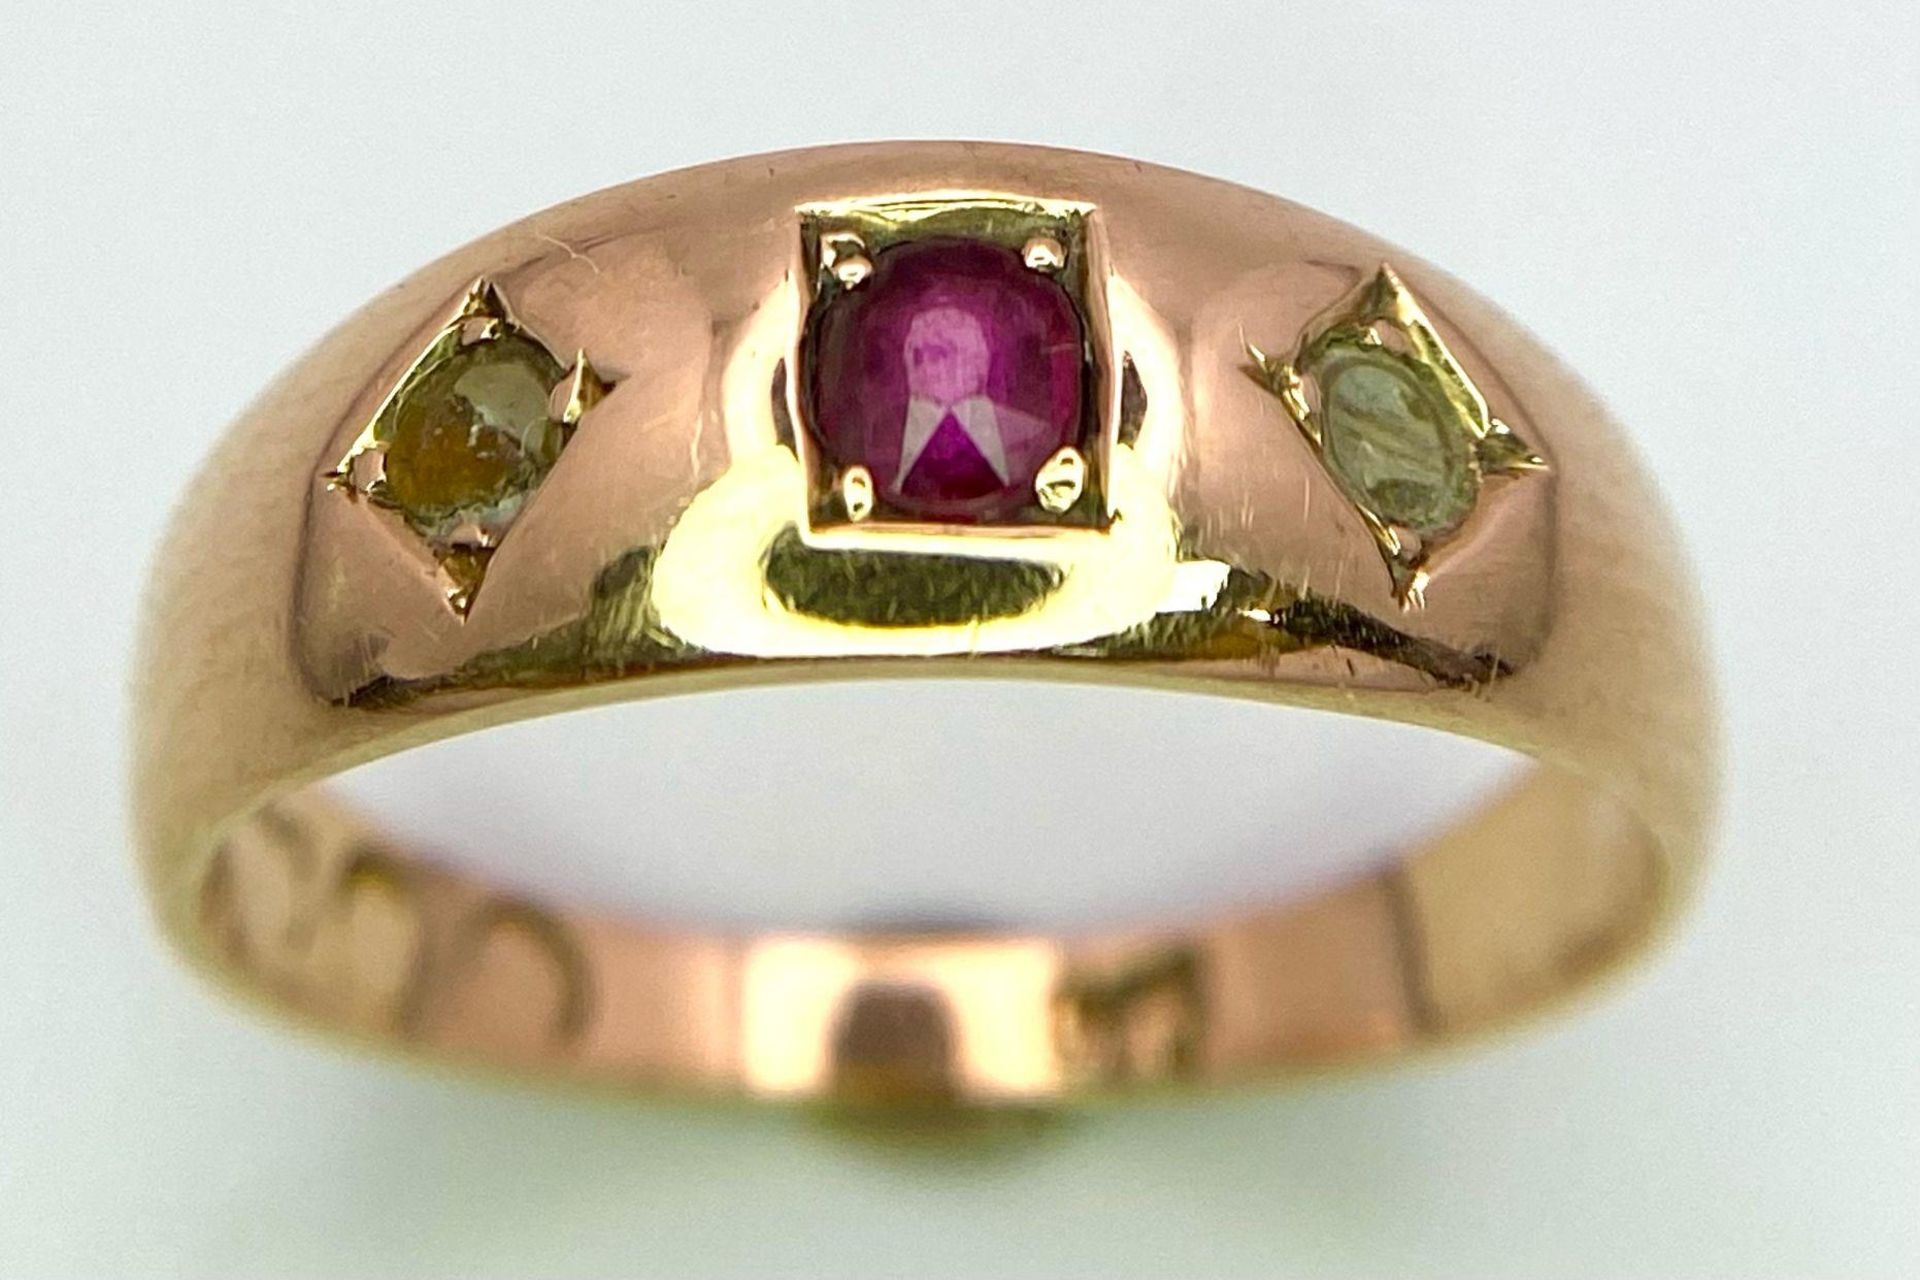 An Antique 15K Gold, Ruby and White Stone Ring. Size N. 3.36g total weight.